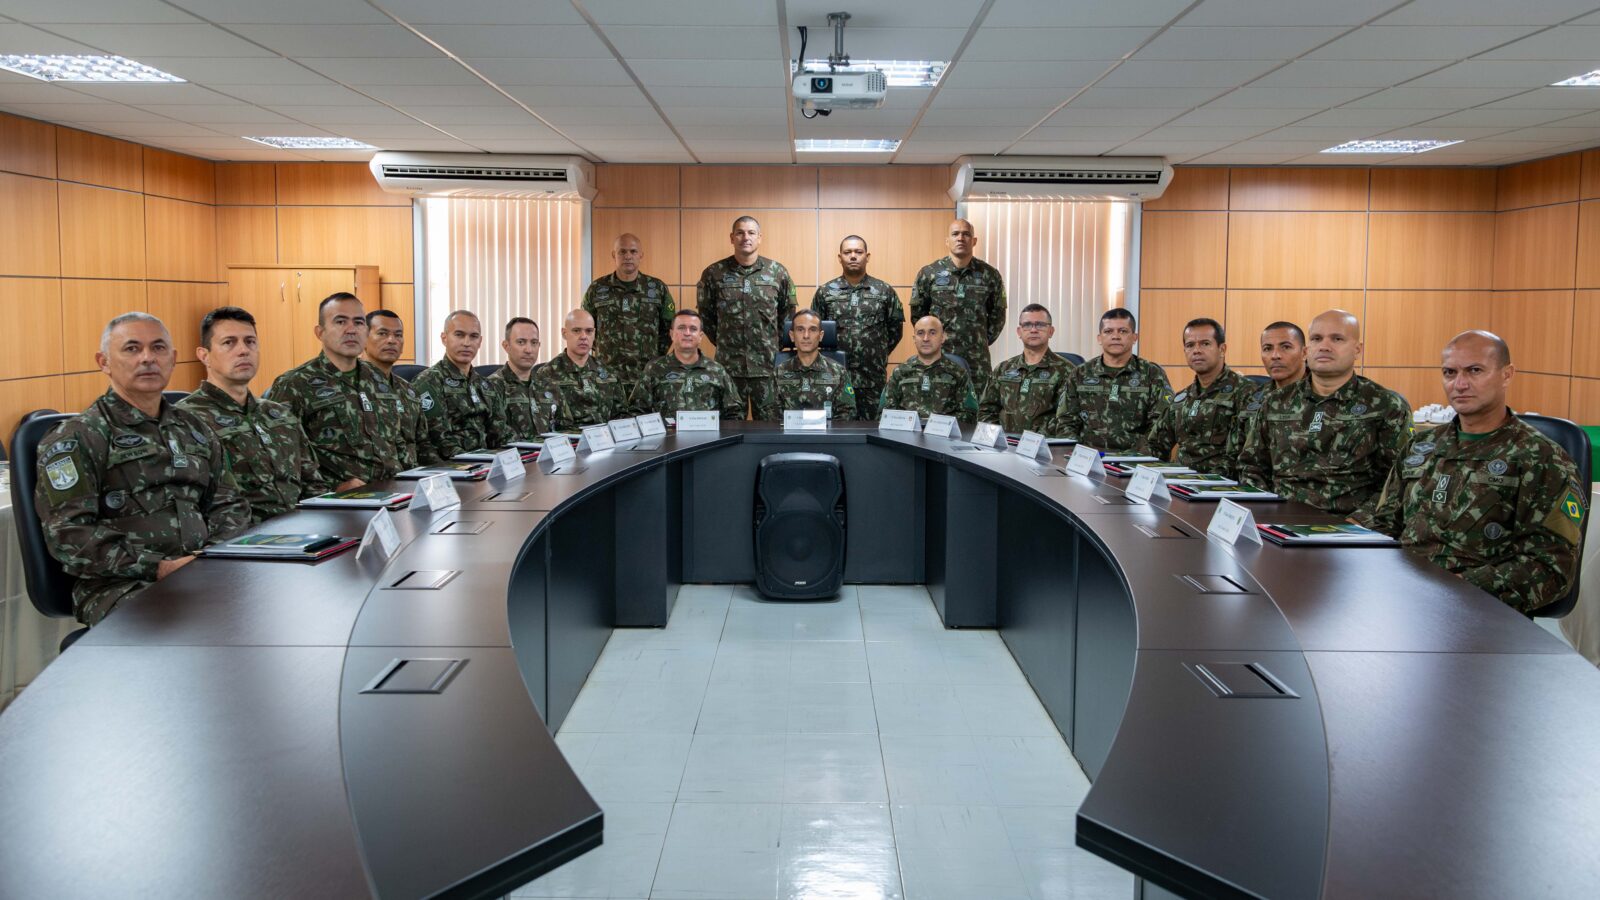 Meeting of Deputy Command Sergeants discusses the career of sergeants in the Brazilian Army